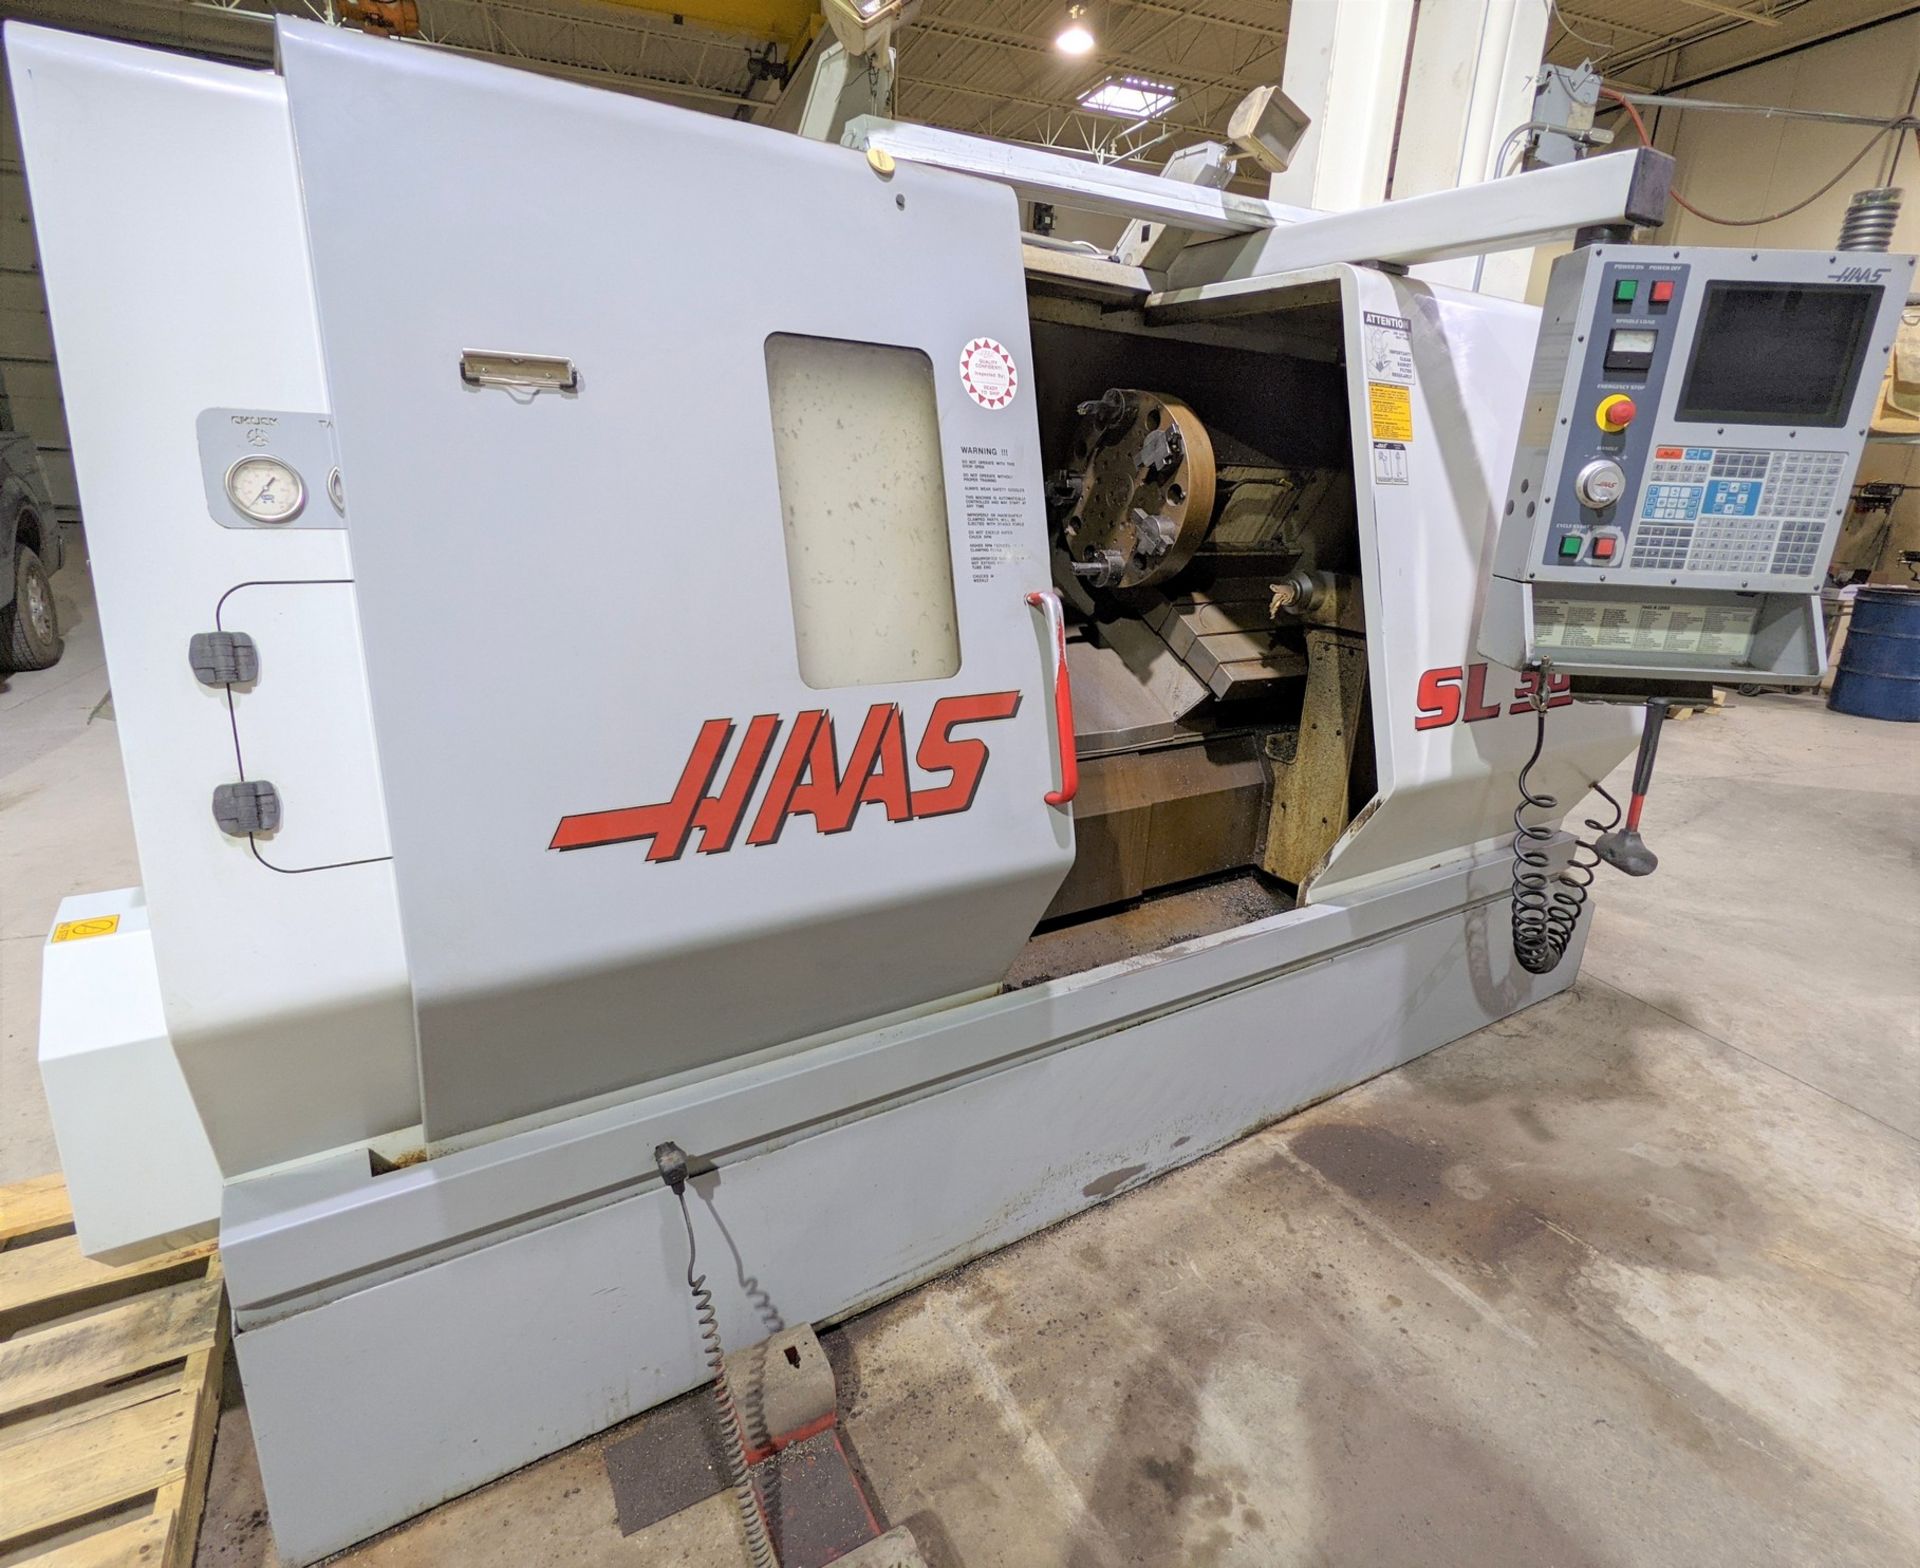 2002 HAAS SL-30T CNC LATHE, S/N 64801, CNC CONTROL, 10” 3-JAW CHUCK, TOOL PRESETTER, 12-STATION - Image 3 of 20